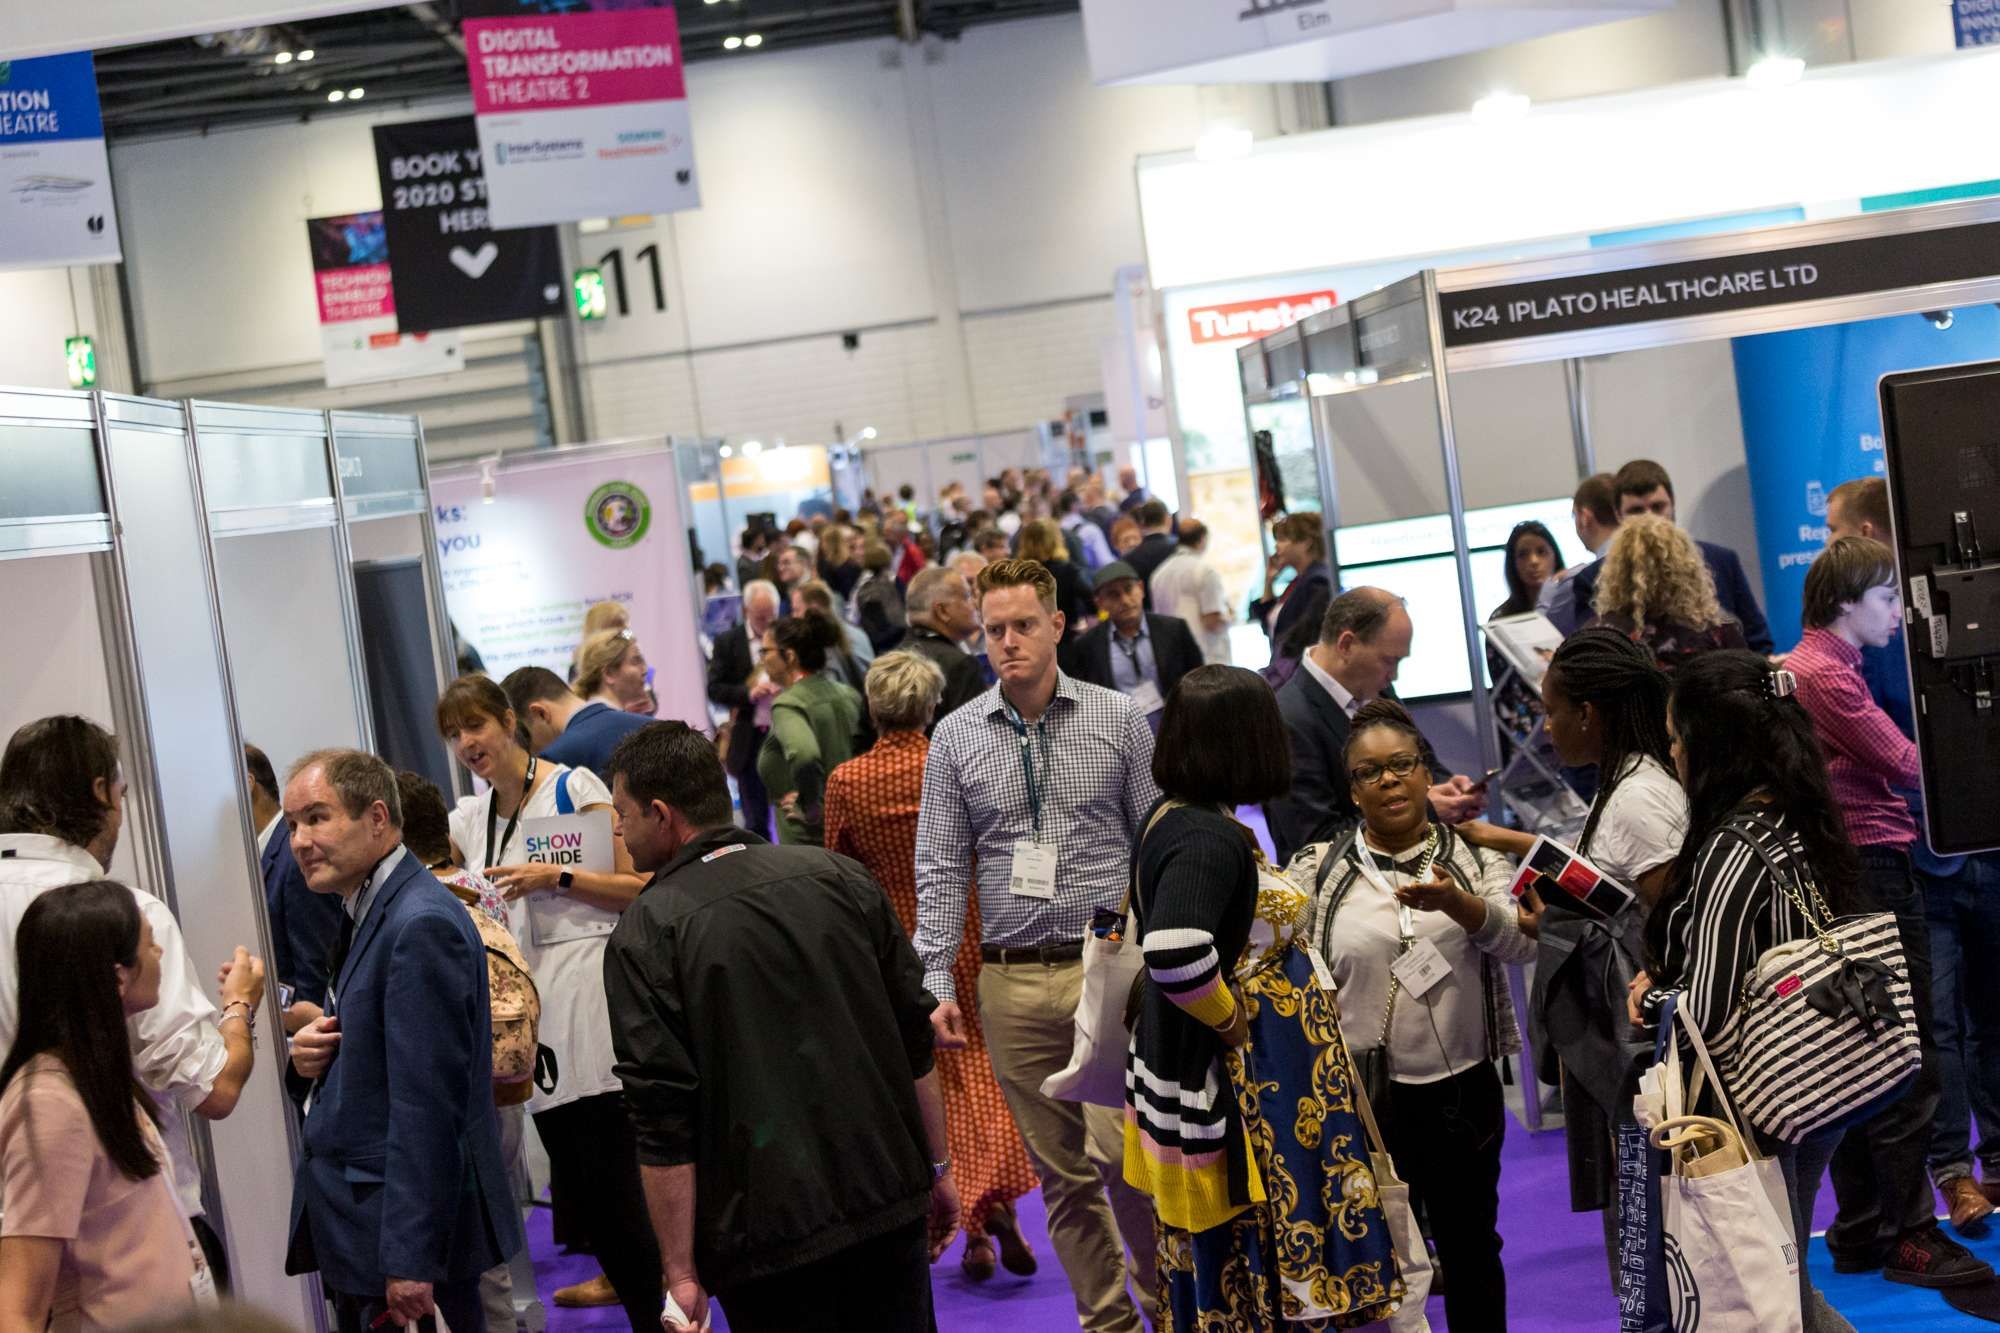 Two weeks to go until The Healthcare Show opens its doors to the entire healthcare community